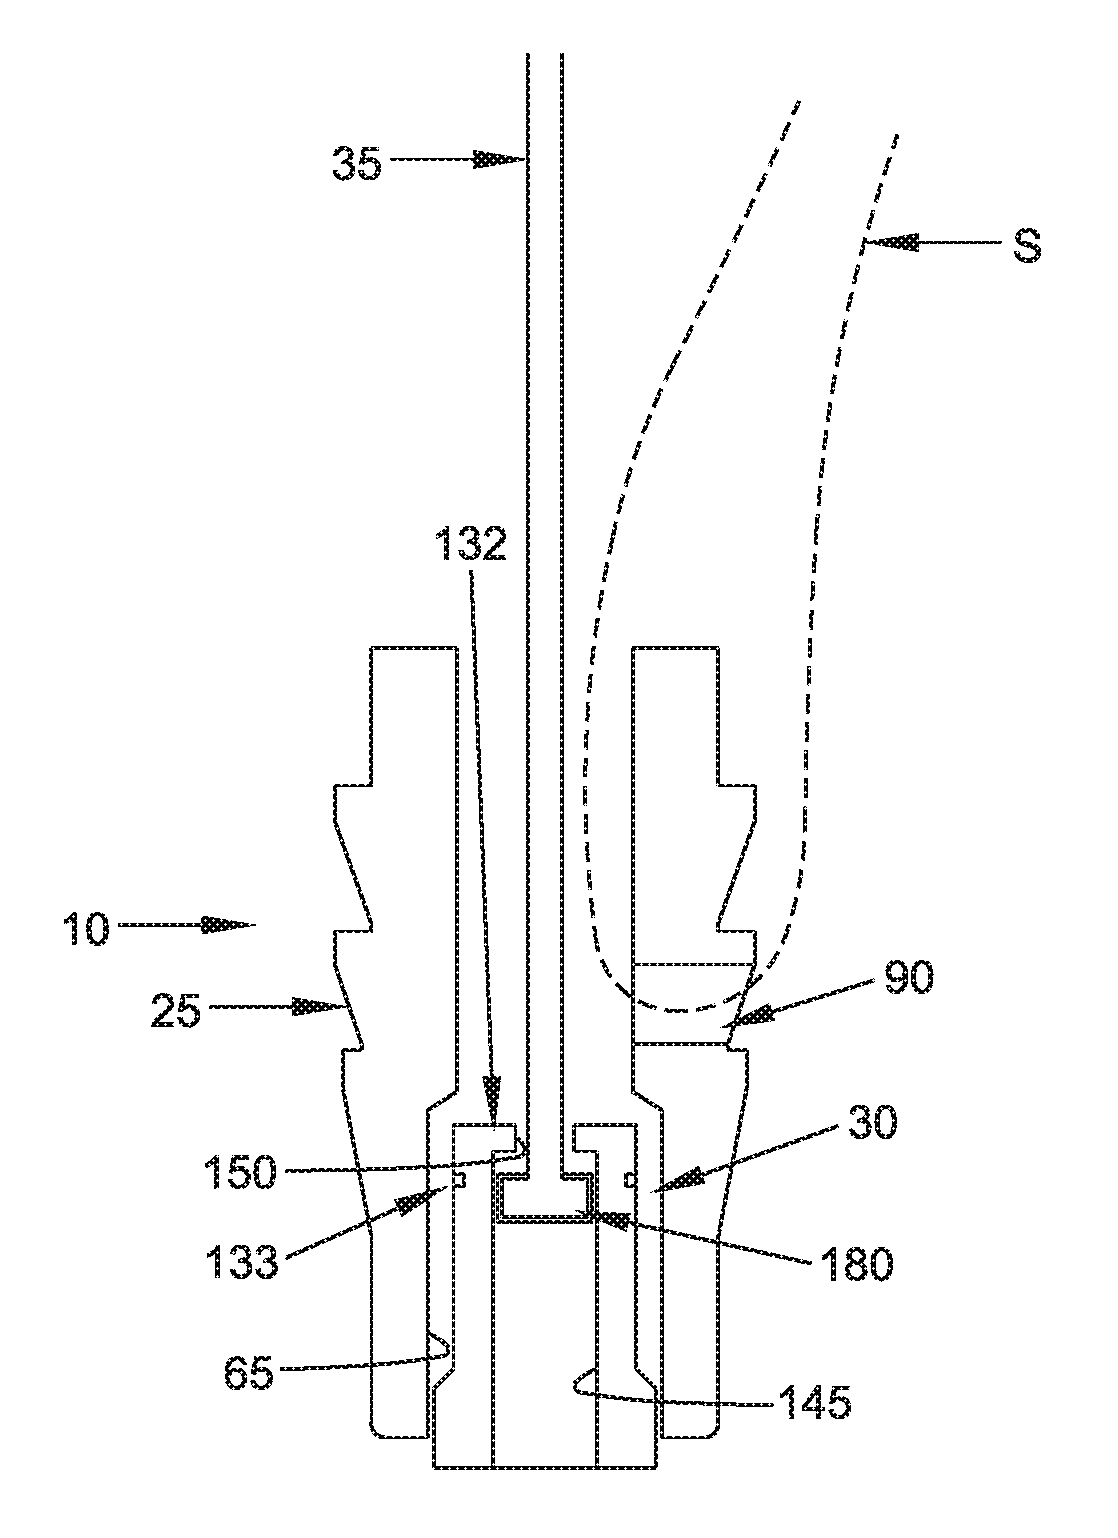 Method and apparatus for attaching tissue to bone, including the provision and use of a novel knotless suture anchor system, including a novel locking element